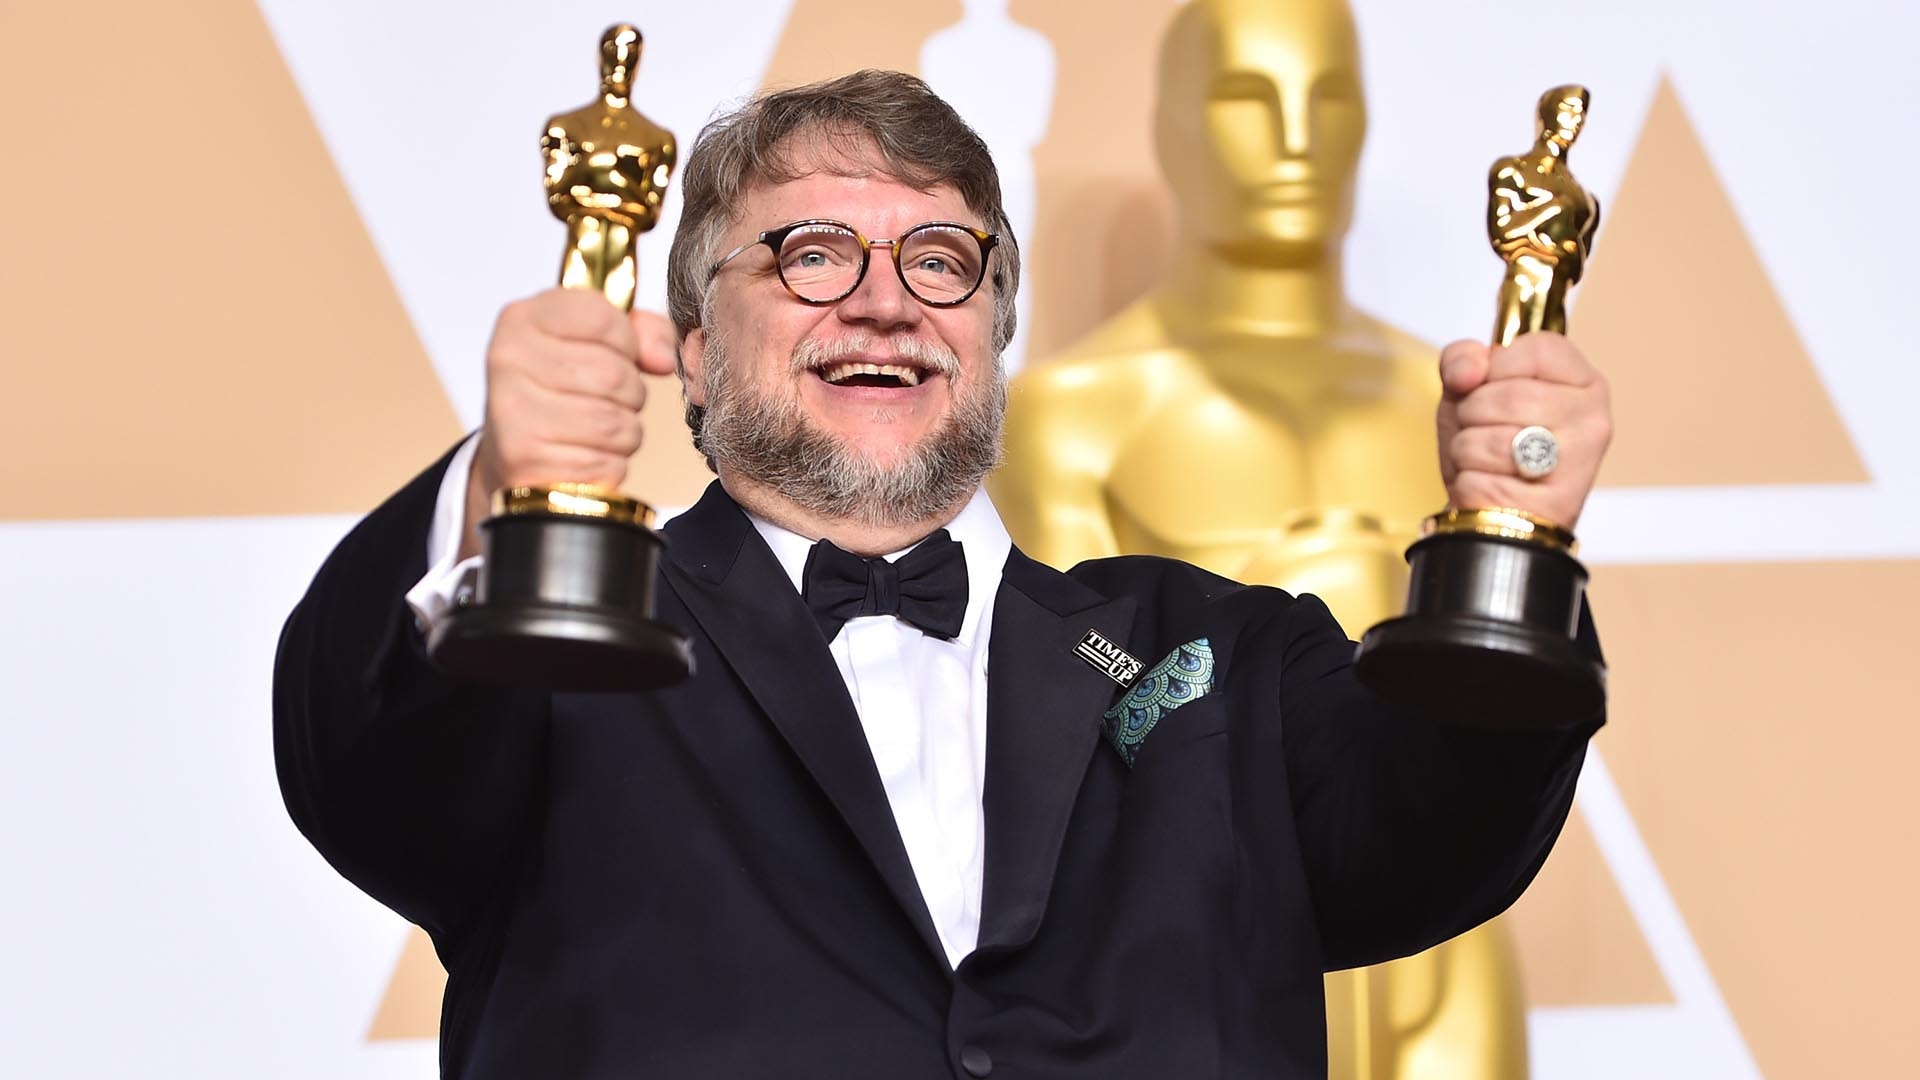 Let S Celebrate Guillermo Del Toro S Two Oscars With A Look Back At His Vibrant Career So Far Syfy Wire